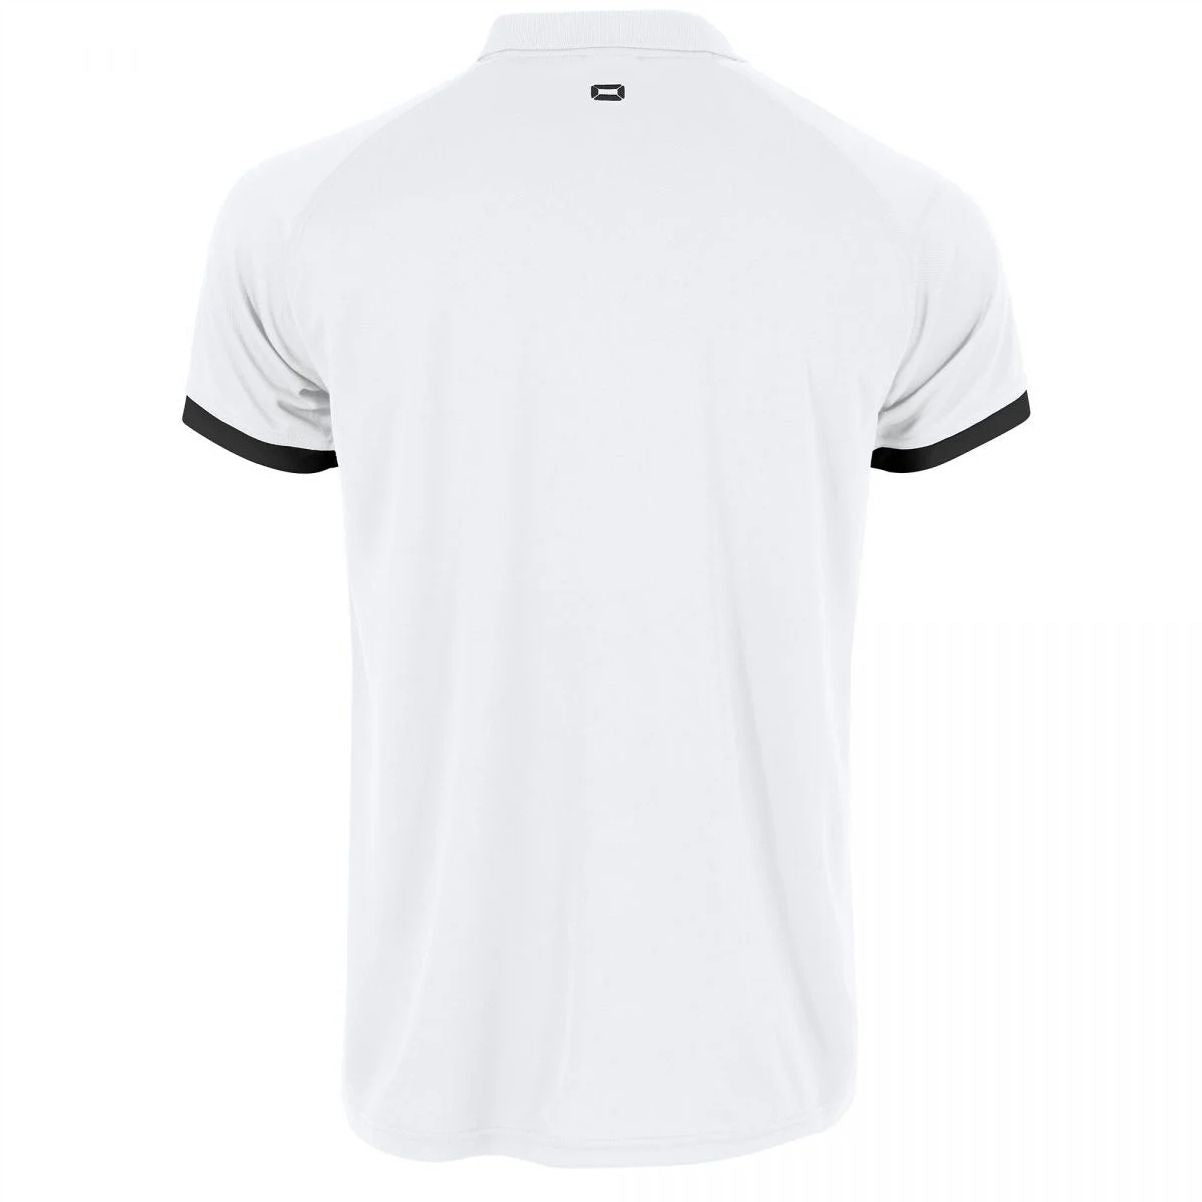 Stanno - First Polo - White - Adult